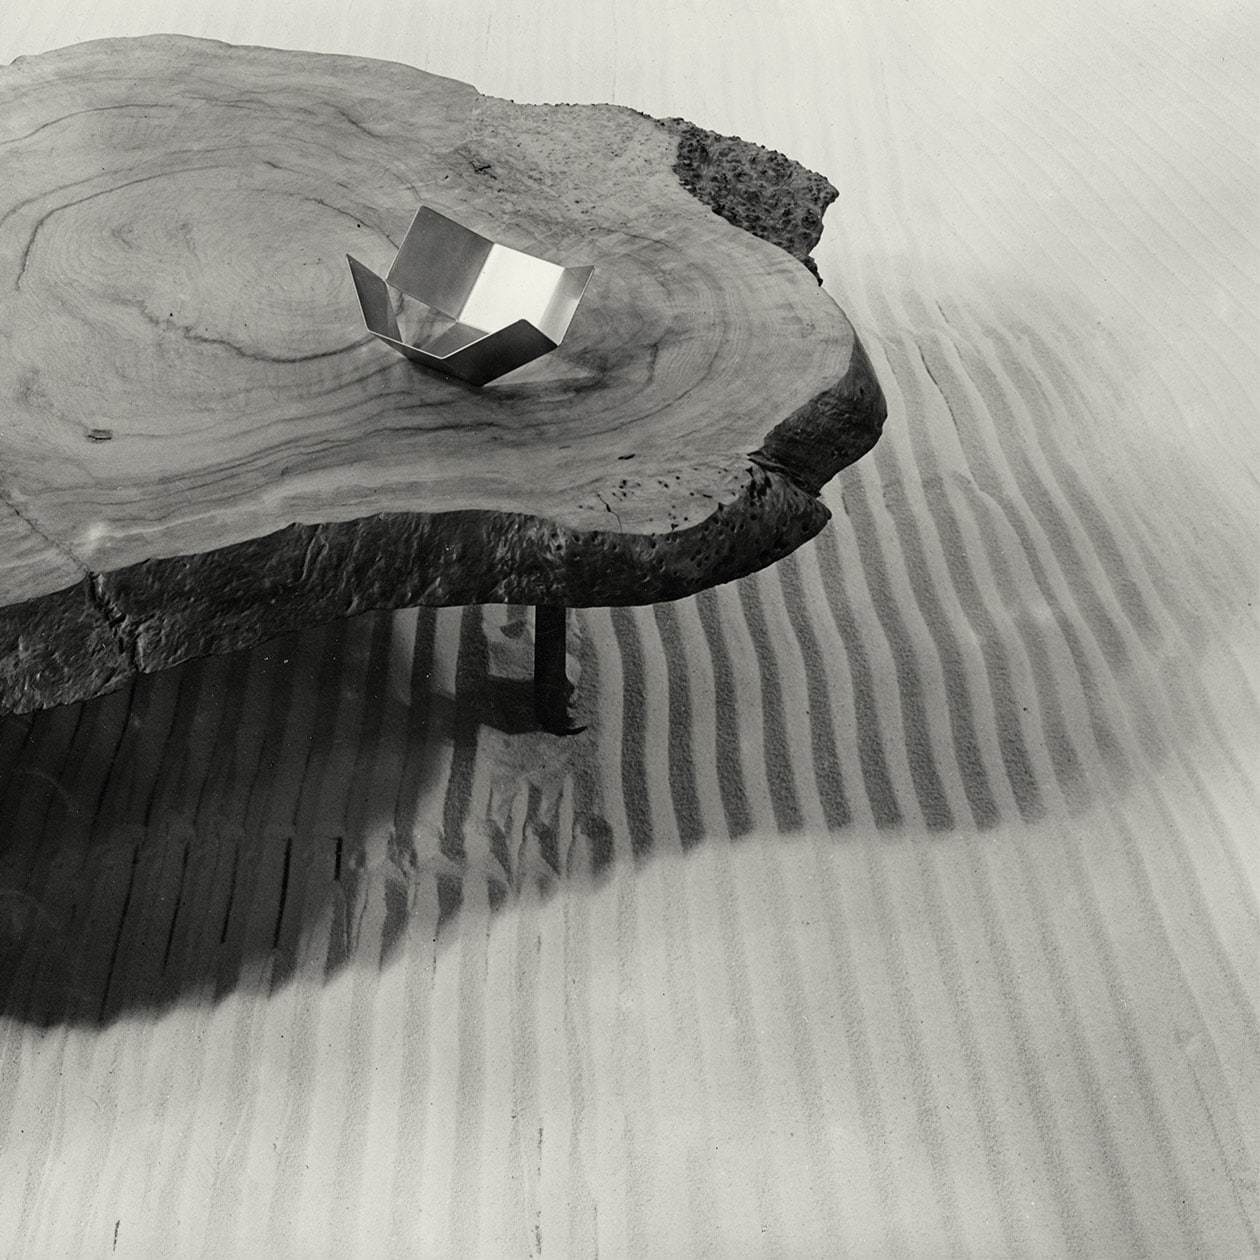 A table made by Charlotte Perriand on top of sand.